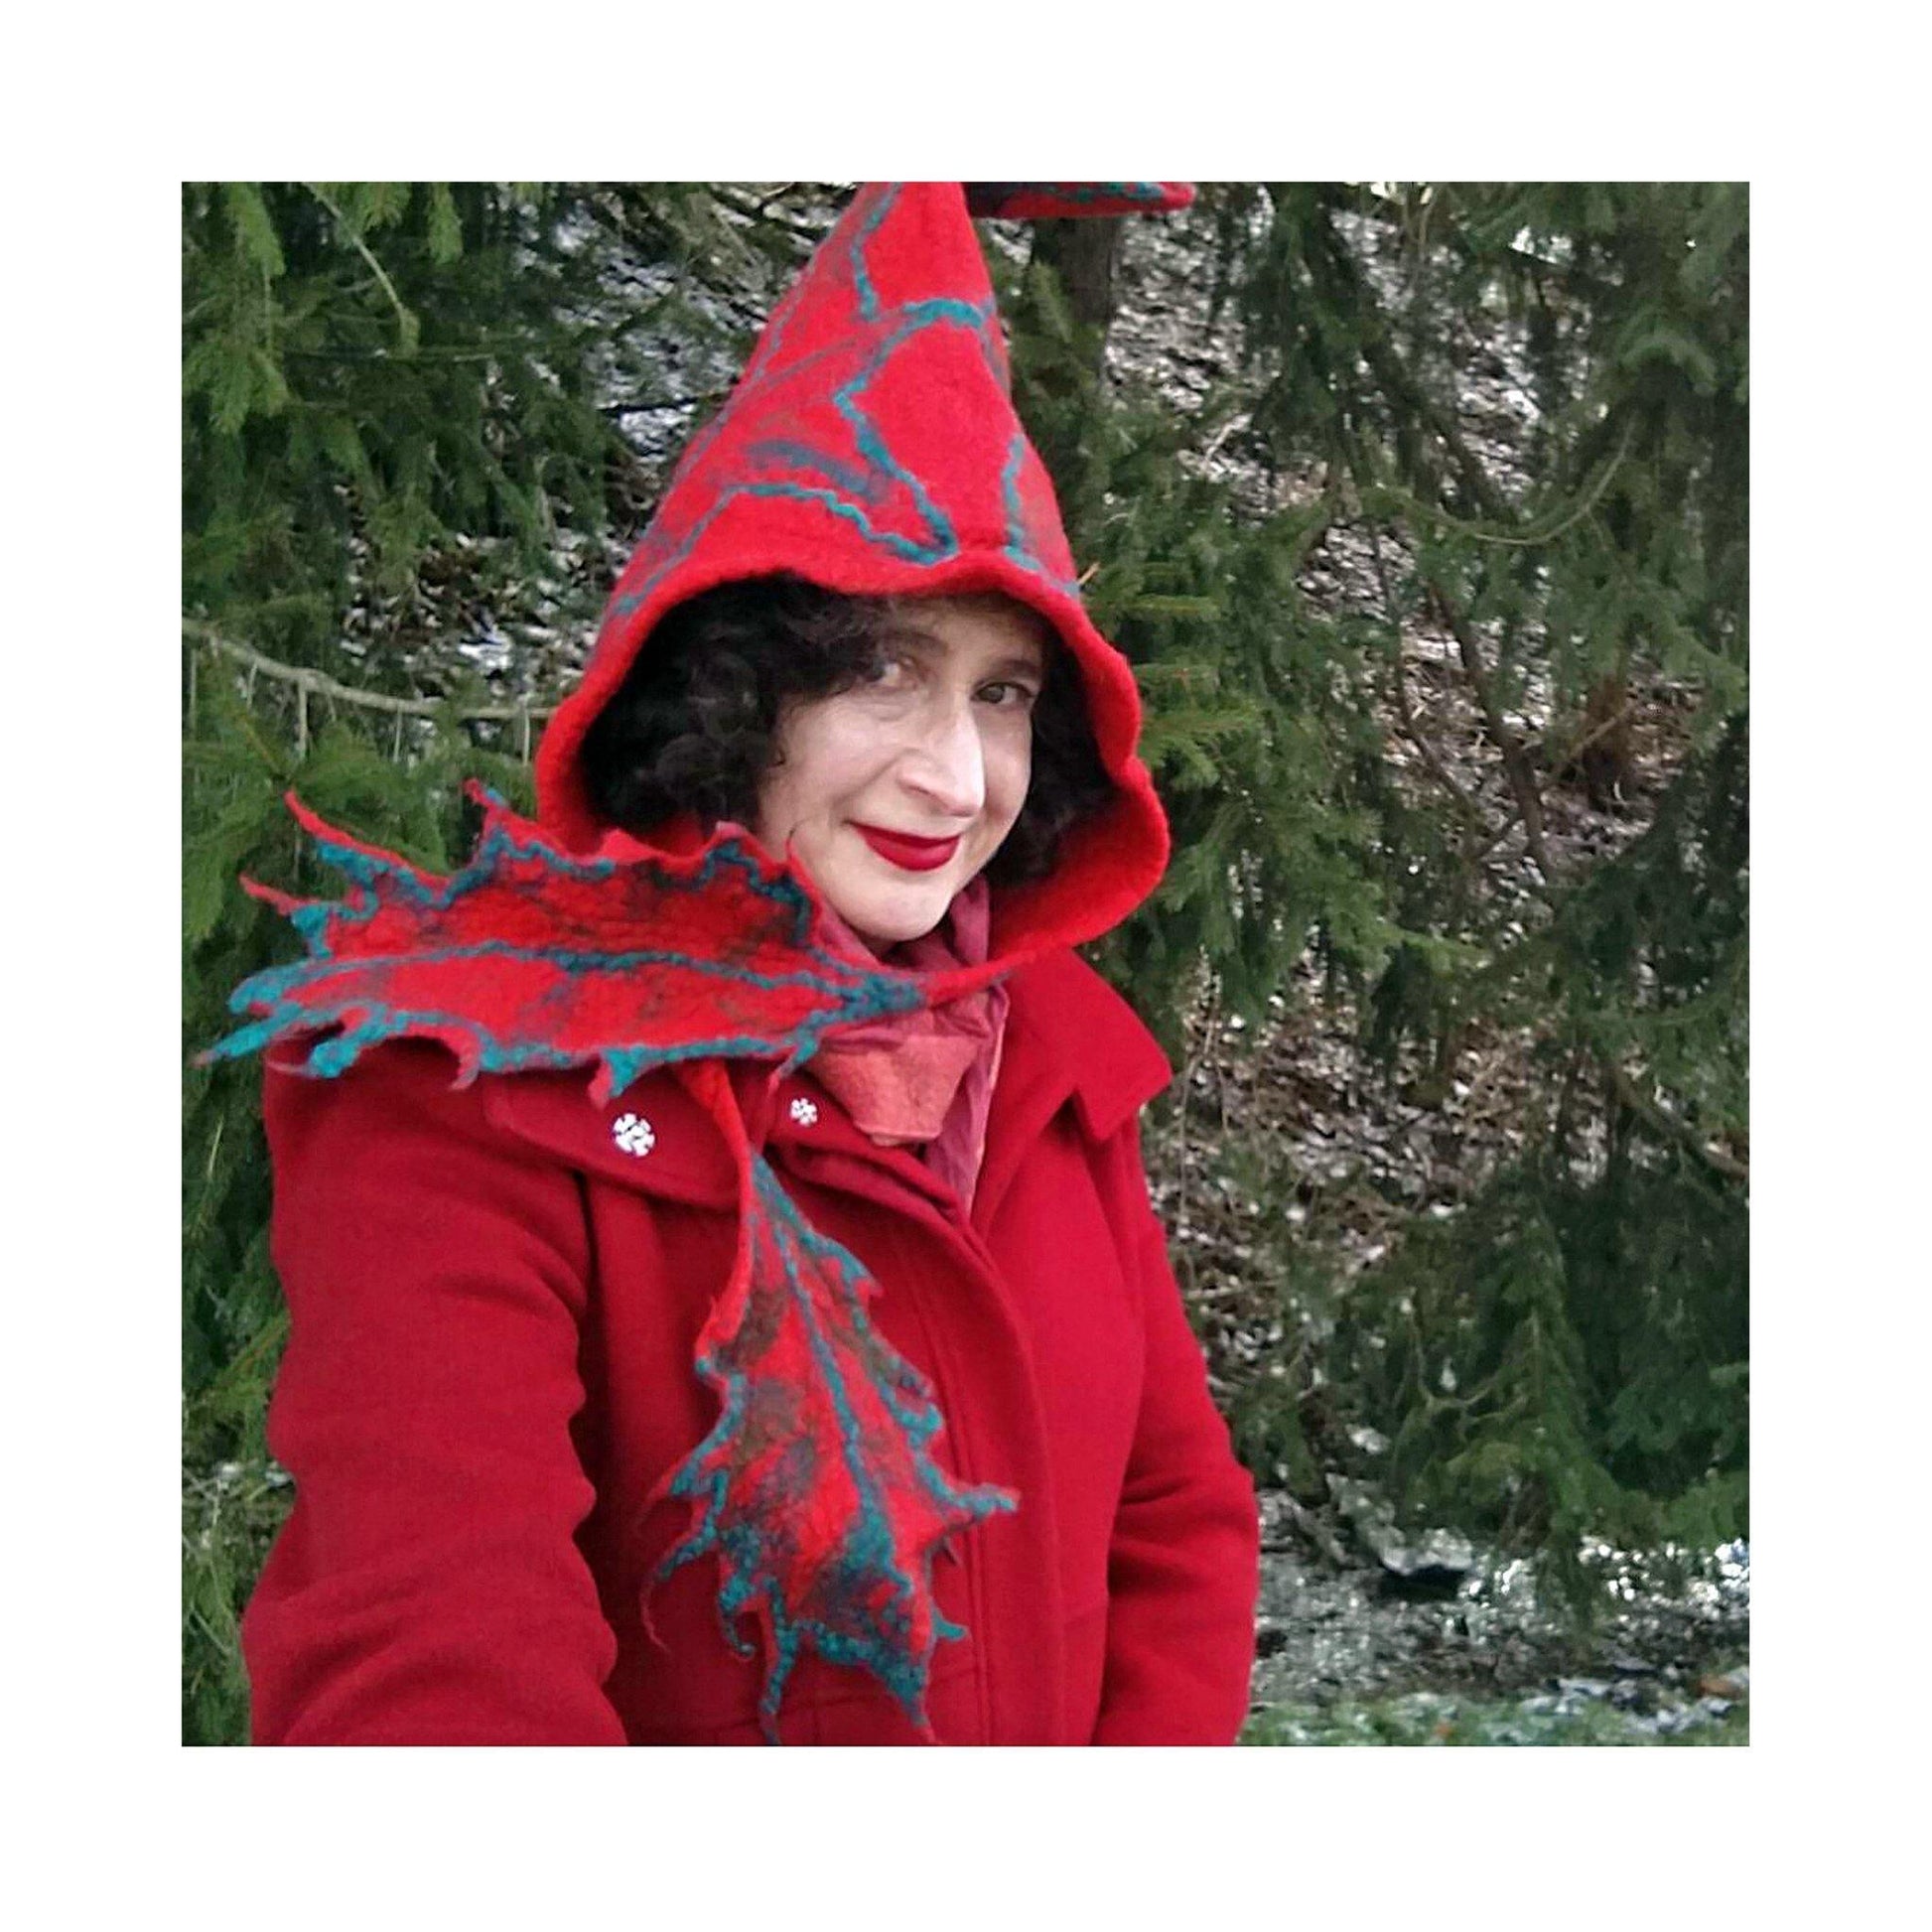 Red Felted Hood with holly ties in front of pine trees.